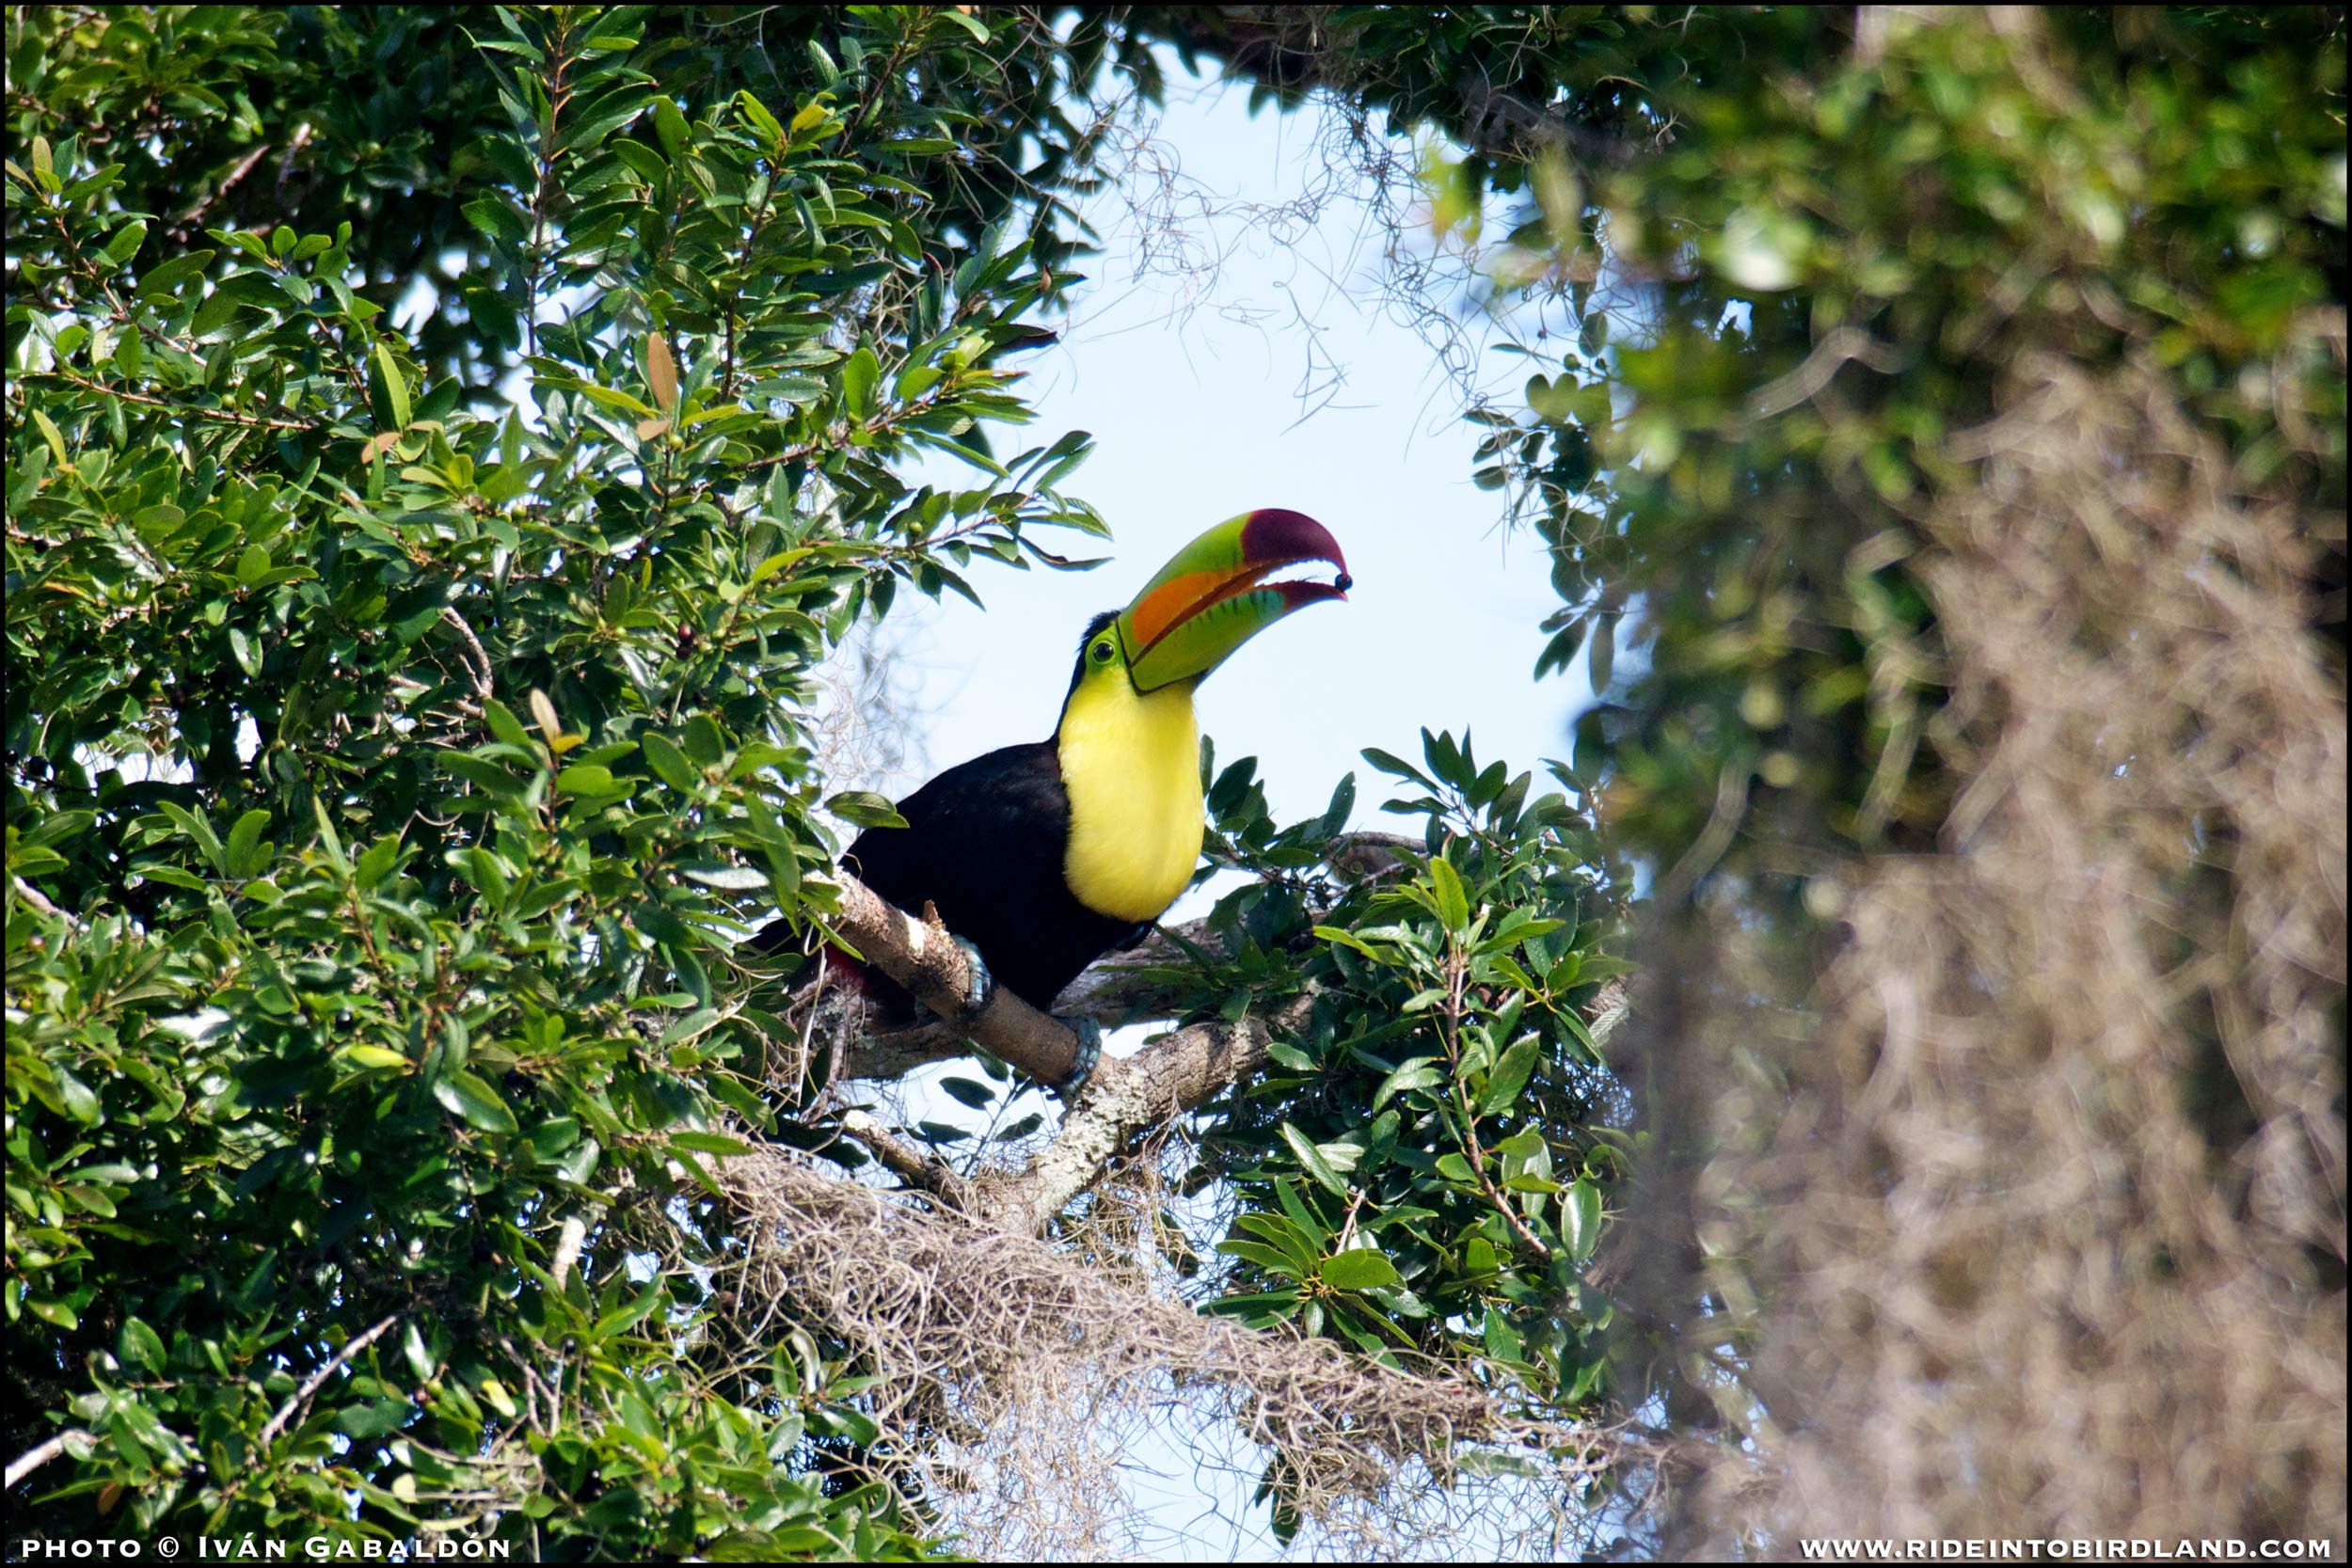 The Keel-billed Toucan (Ramphastos sulfuratus) uses its bill to pick fruits with great precision. (Photo © Iván Gabaldón)